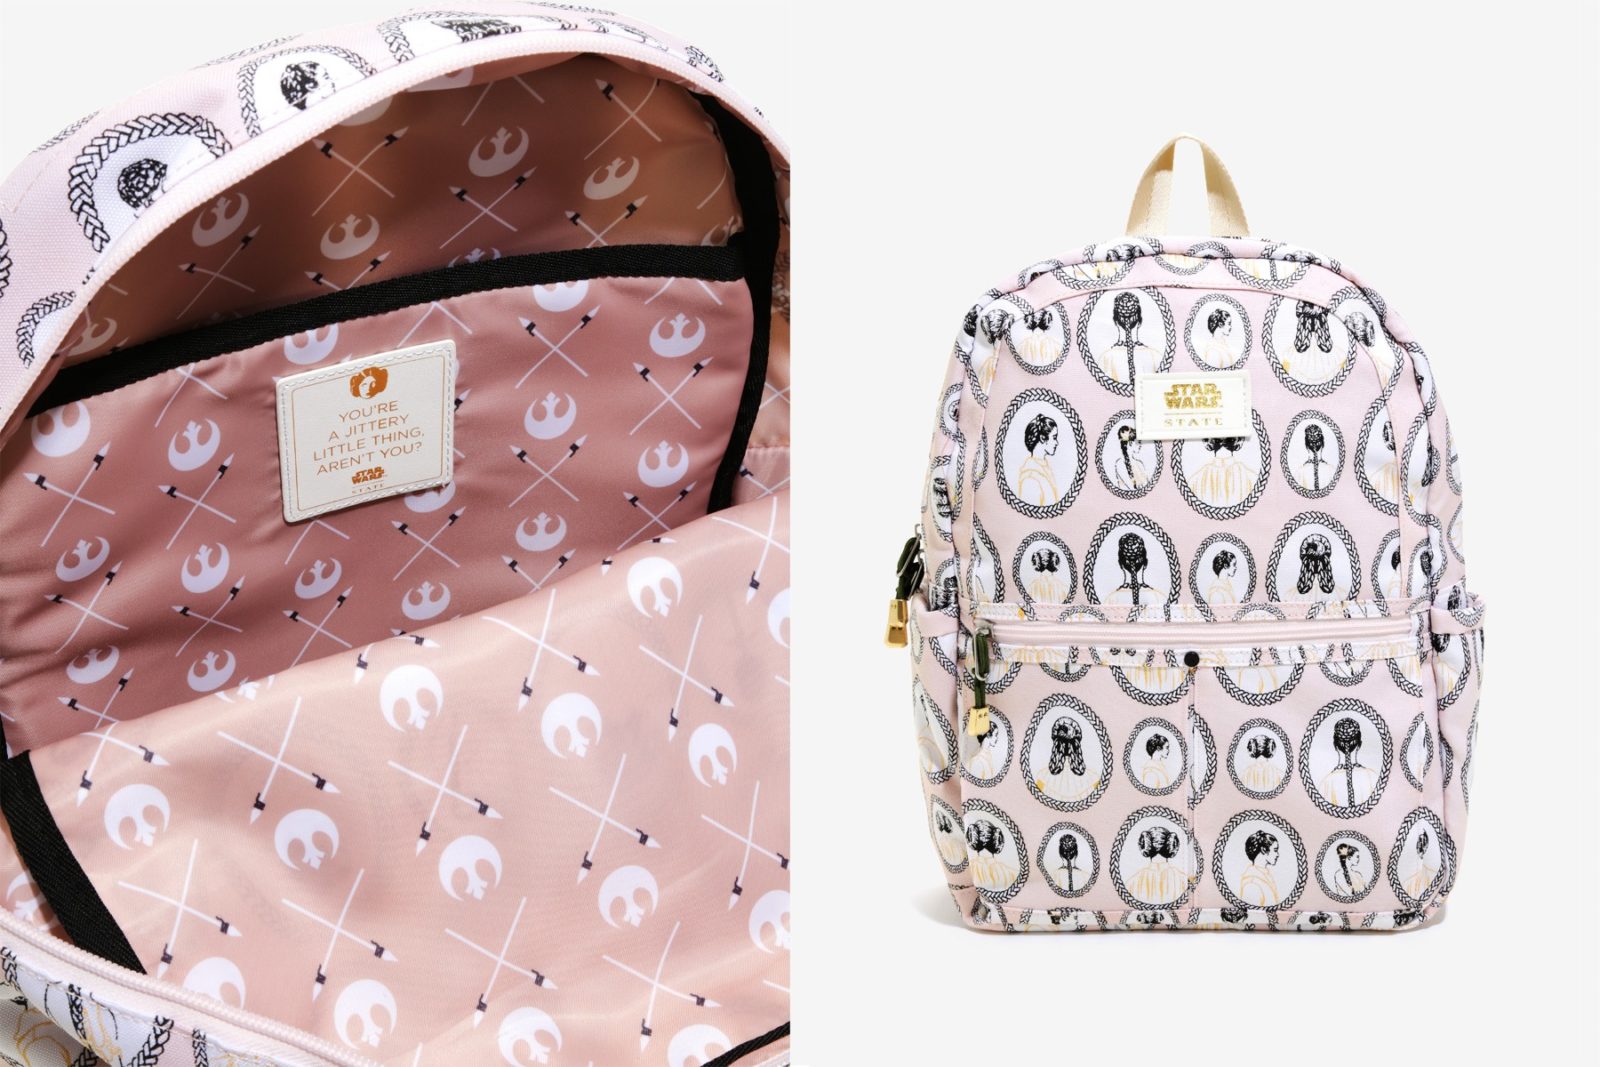 State x Star Wars Princes Leia backpack at Box Lunch